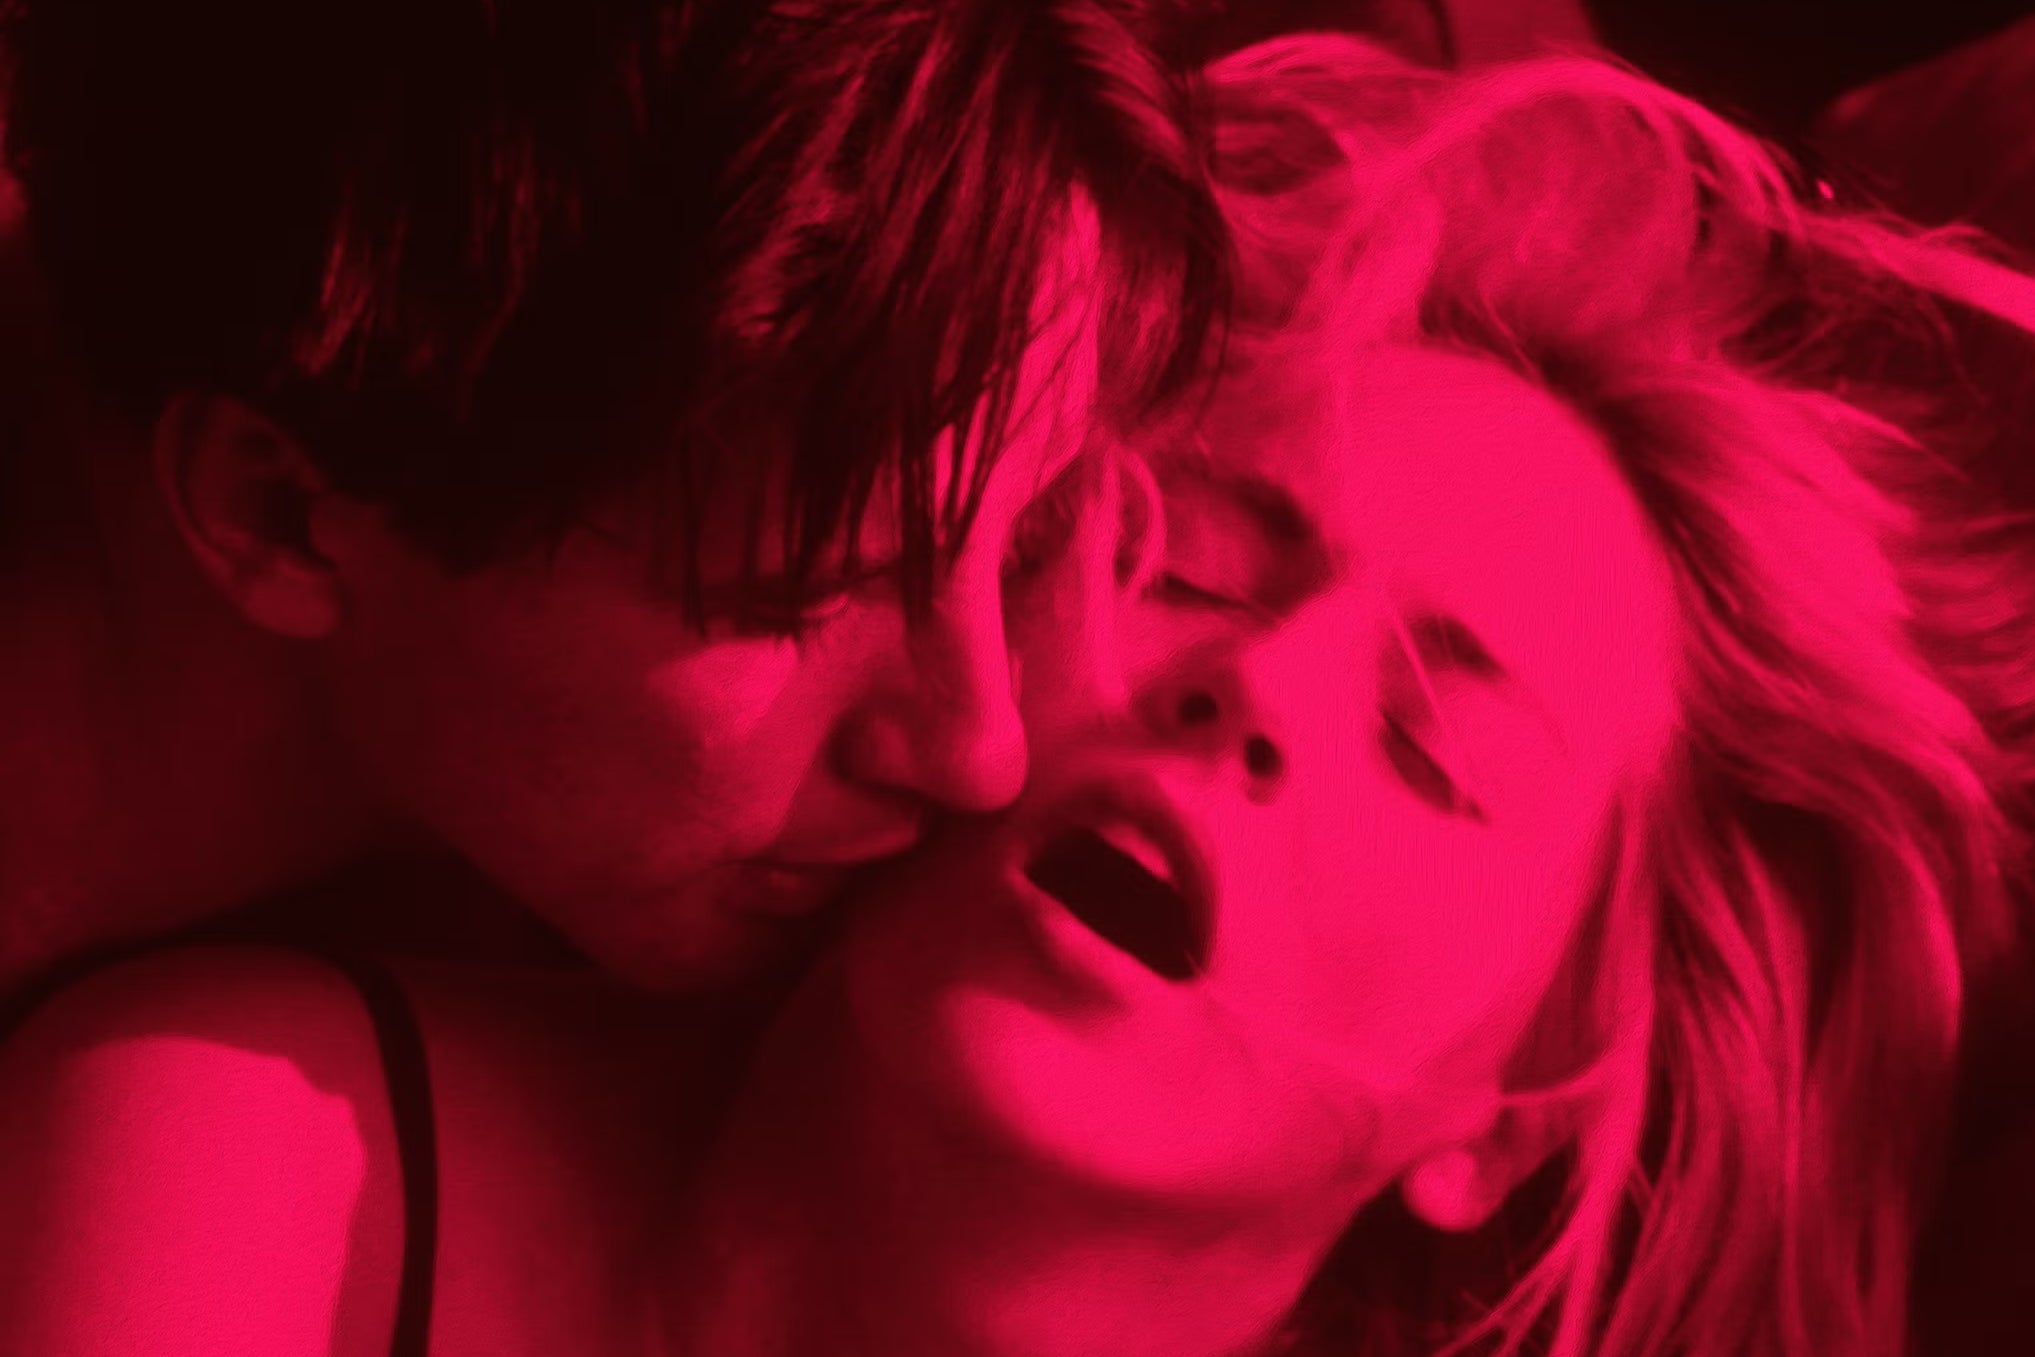 Saxophone scores and phallic murder weapons: William Baldwin and Sharon Stone in ‘Sliver’